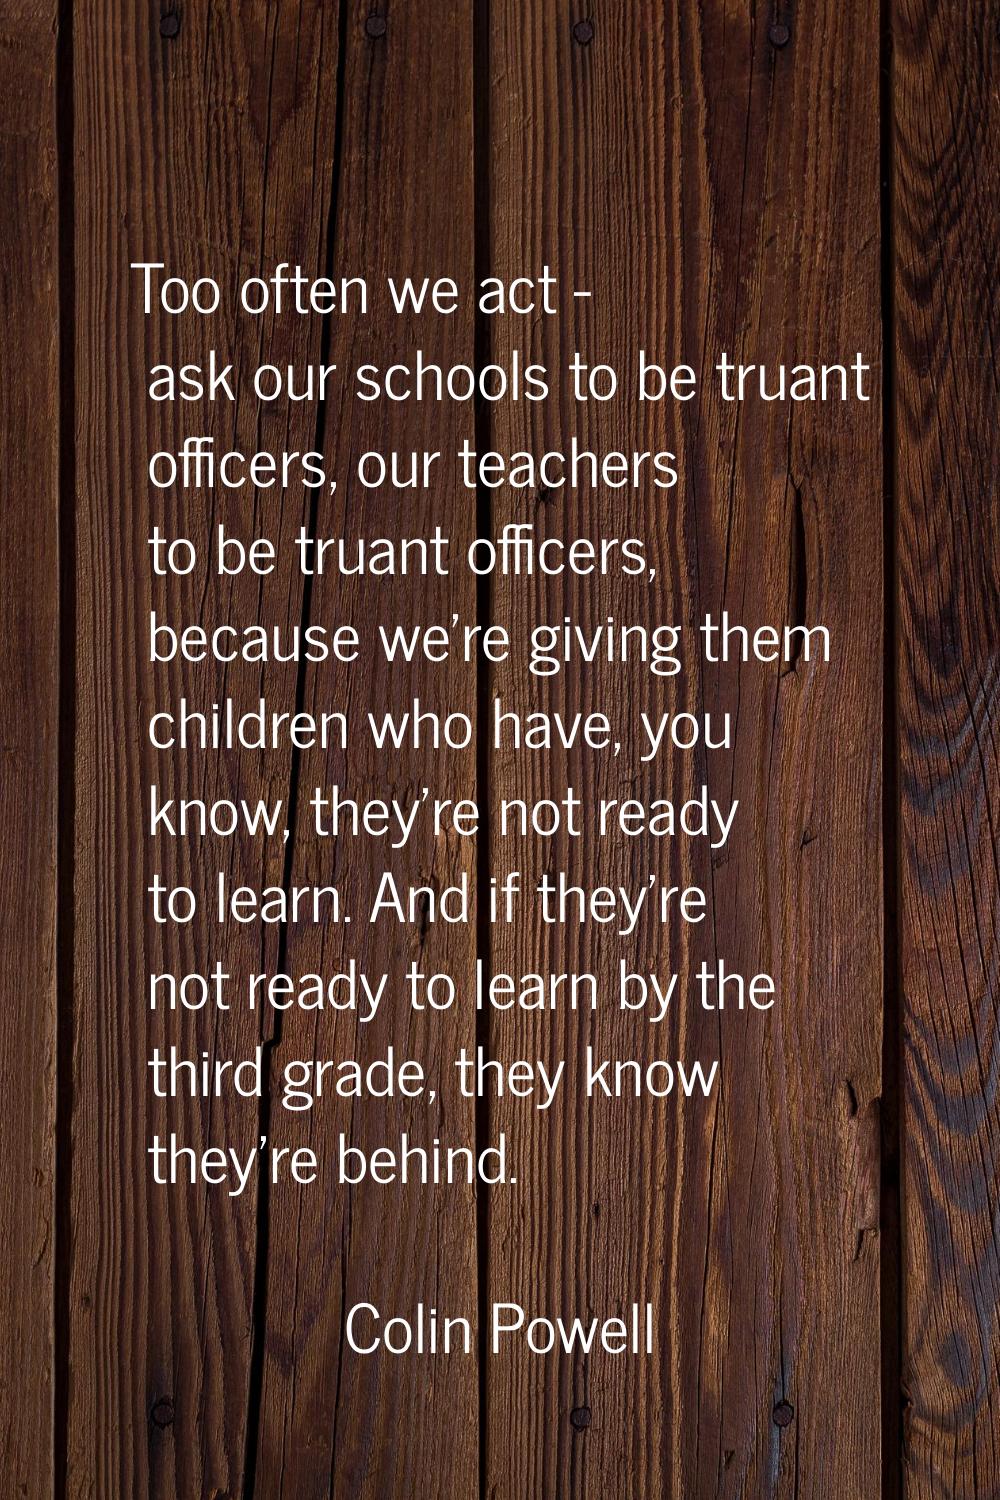 Too often we act - ask our schools to be truant officers, our teachers to be truant officers, becau